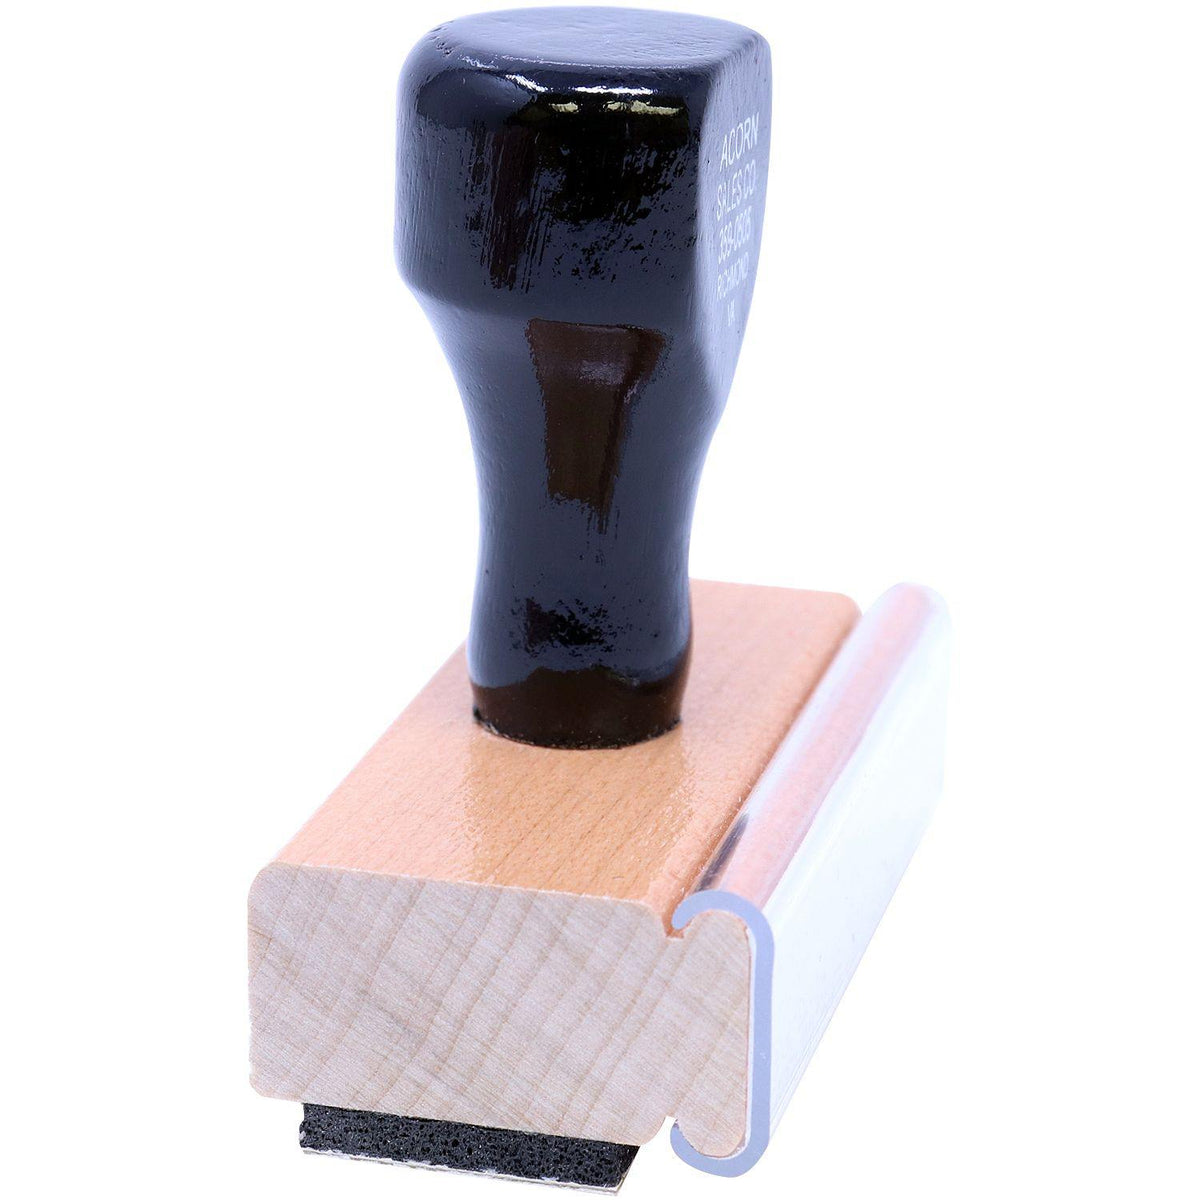 Side View of Void Rubber Stamp at an Angle